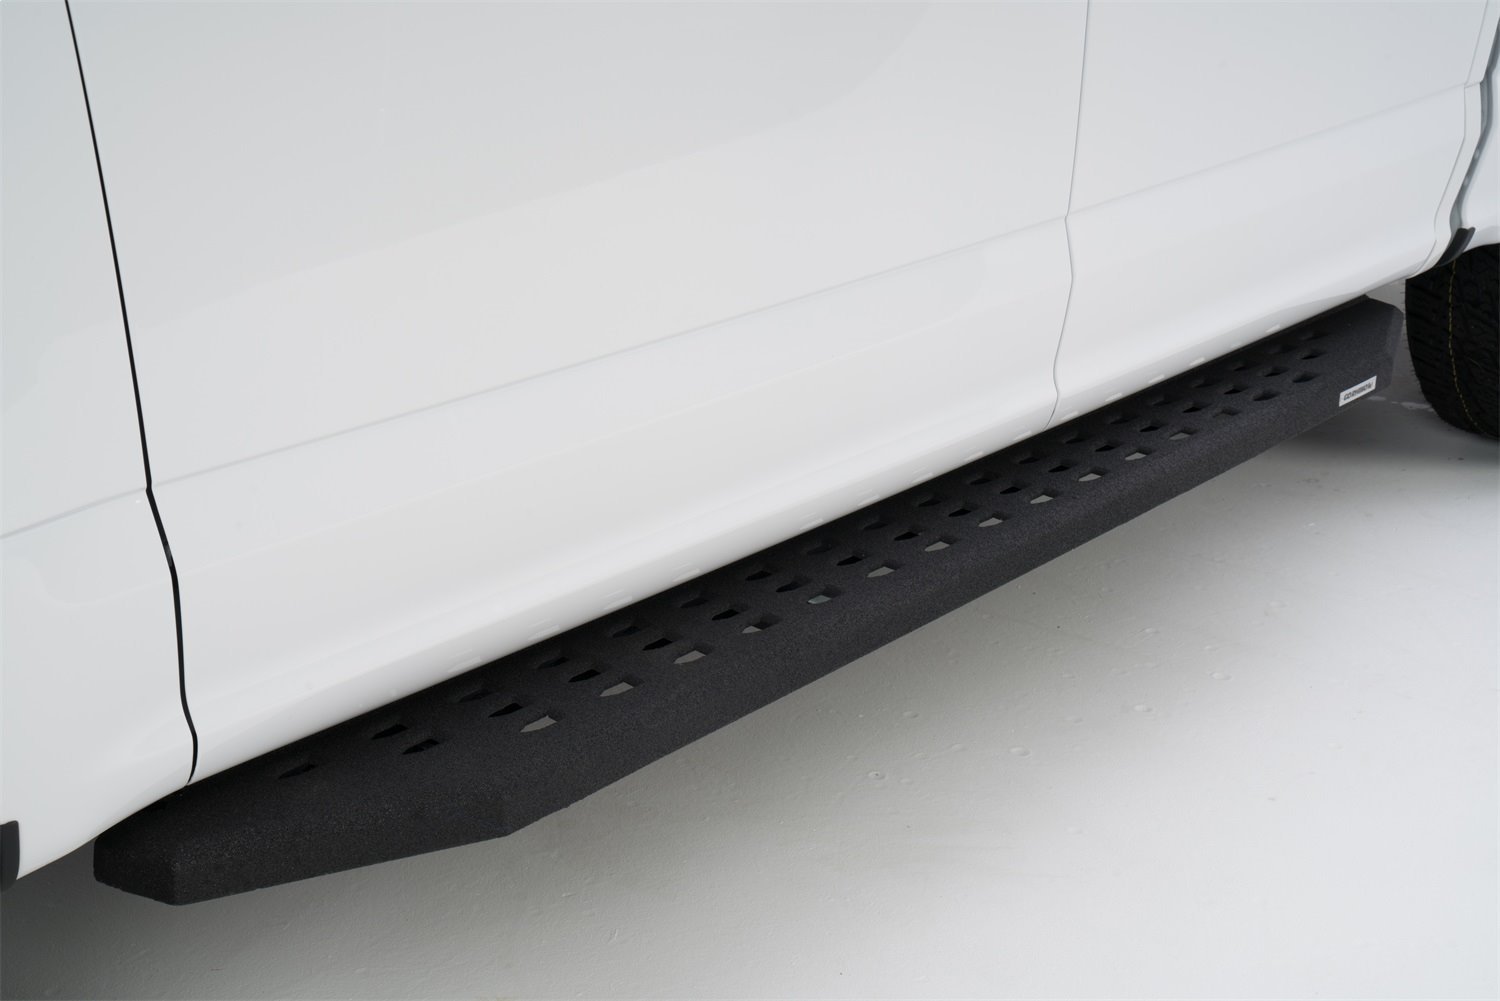 RB20 Running boards for 2007-2017 Toyota Tundra